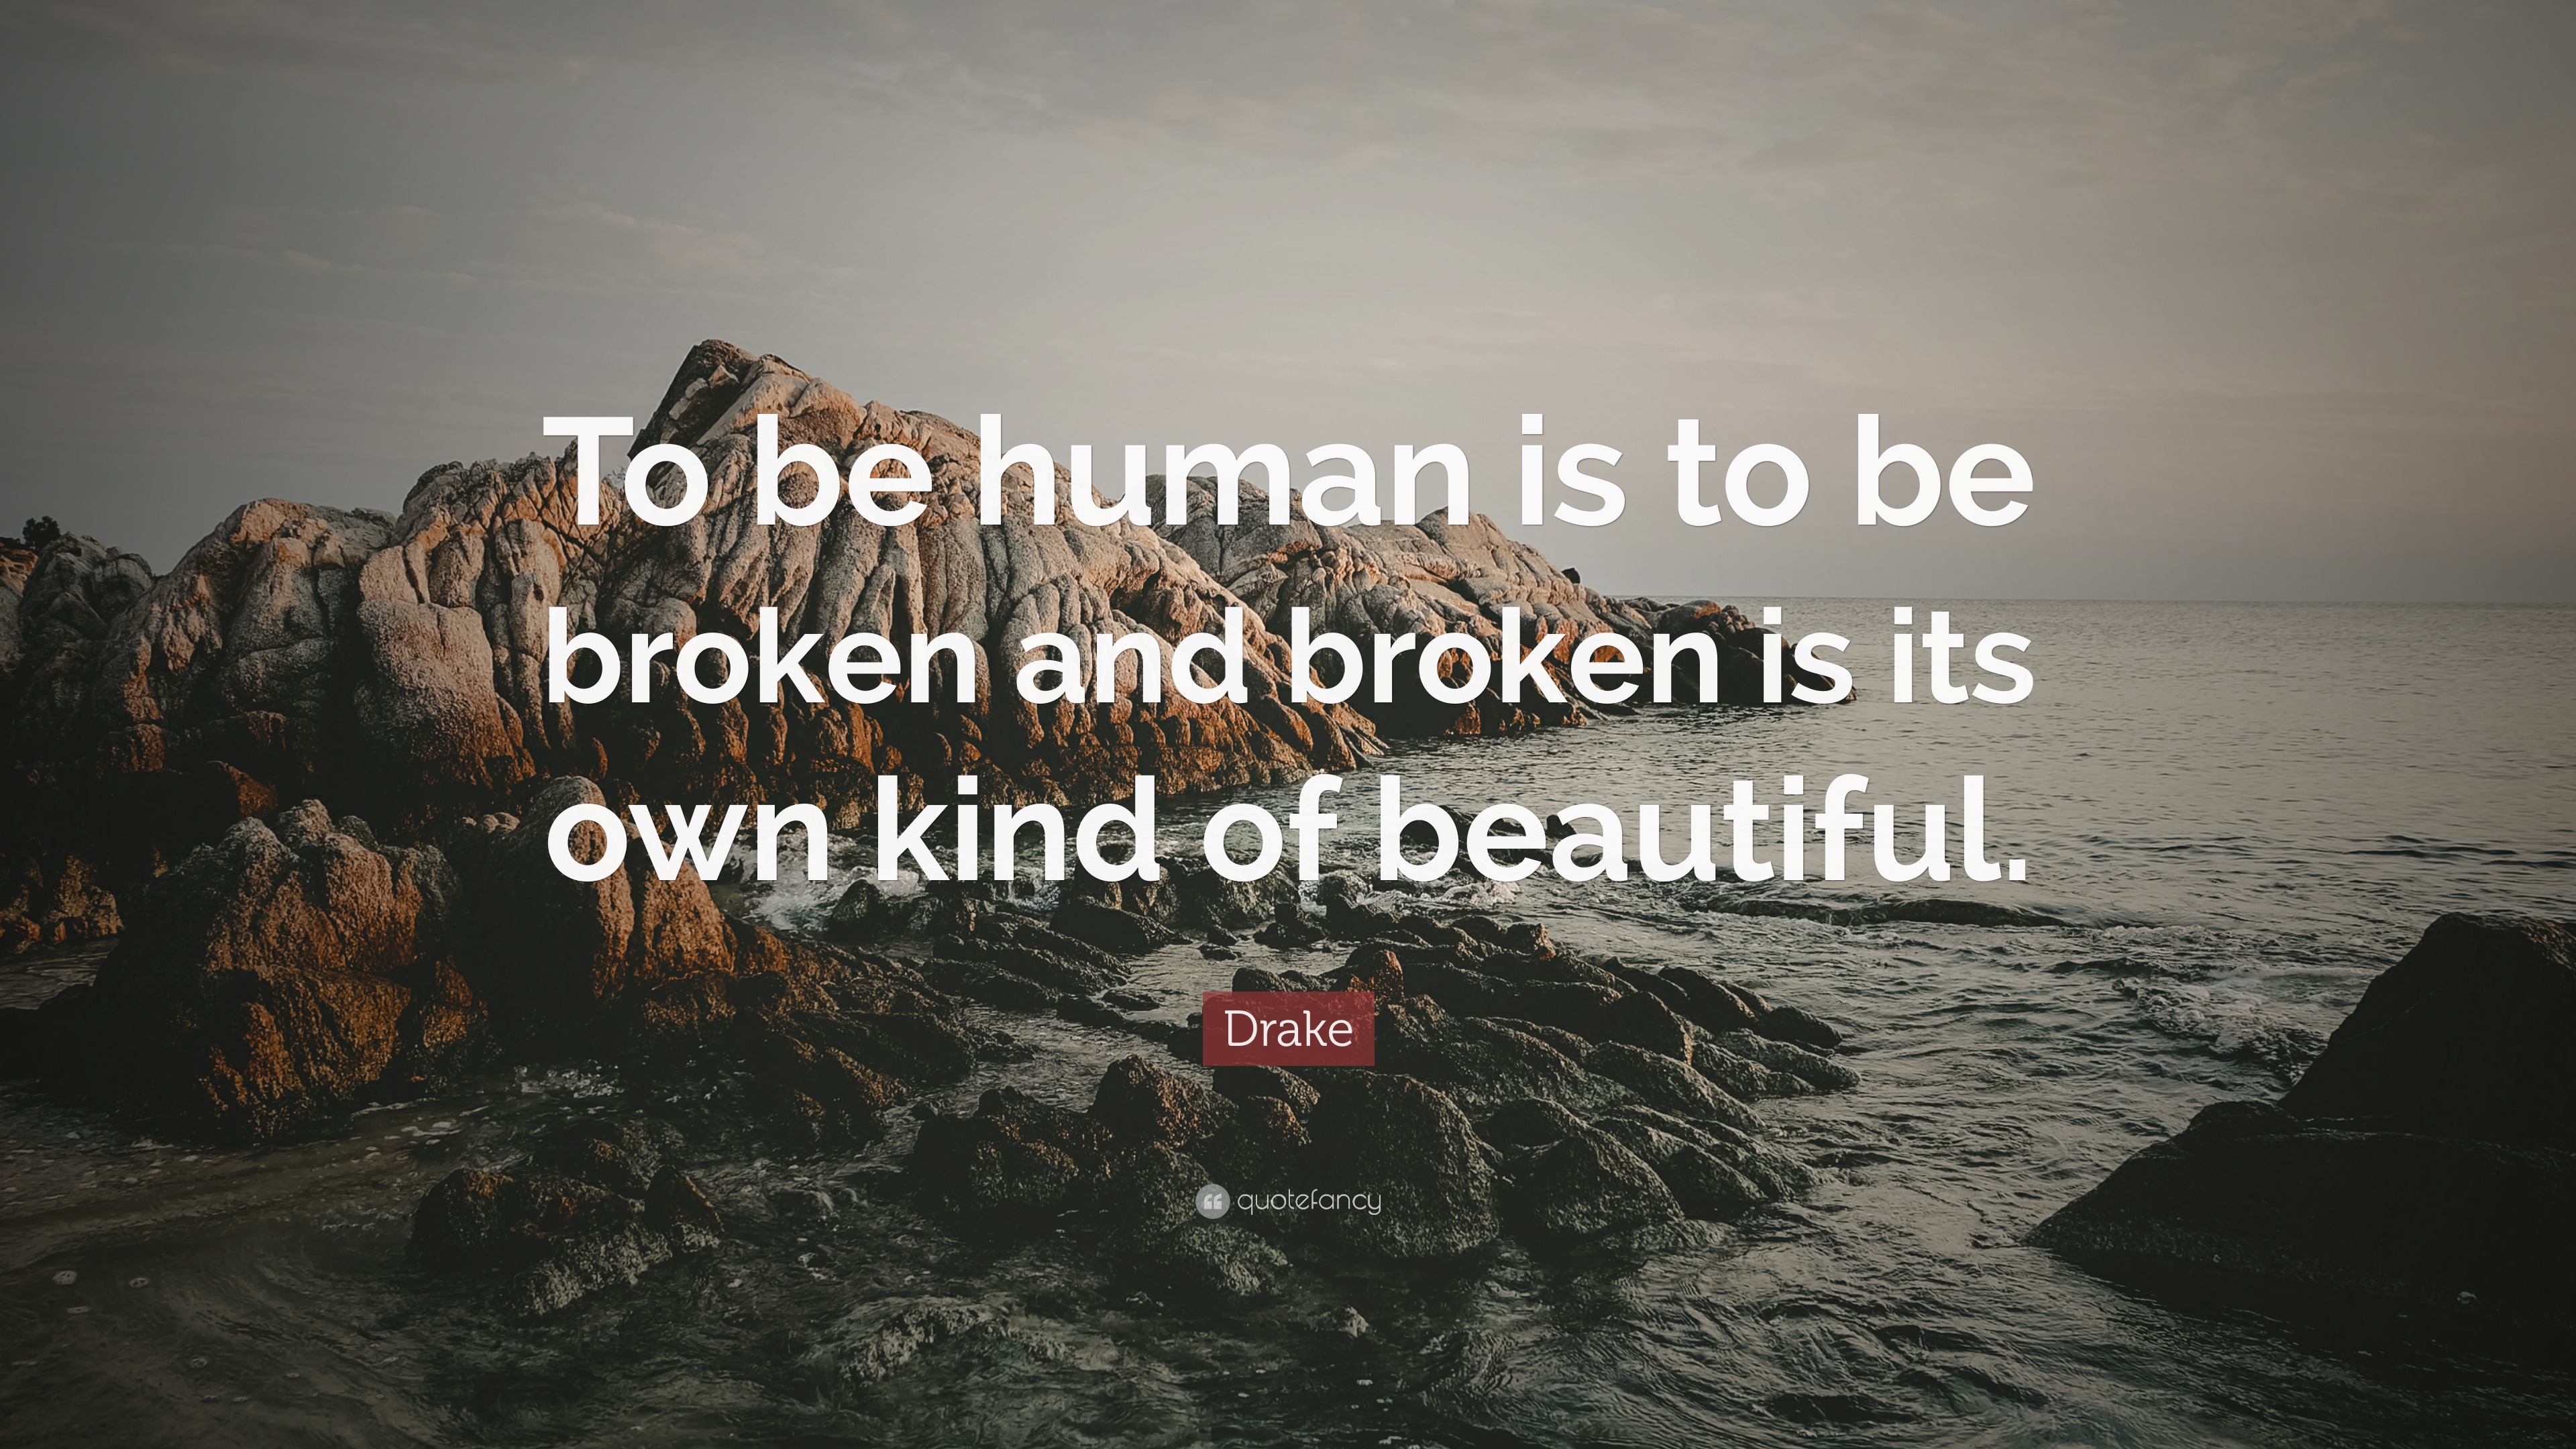 Drake Quote: “To be human is to be broken and broken is its own kind of